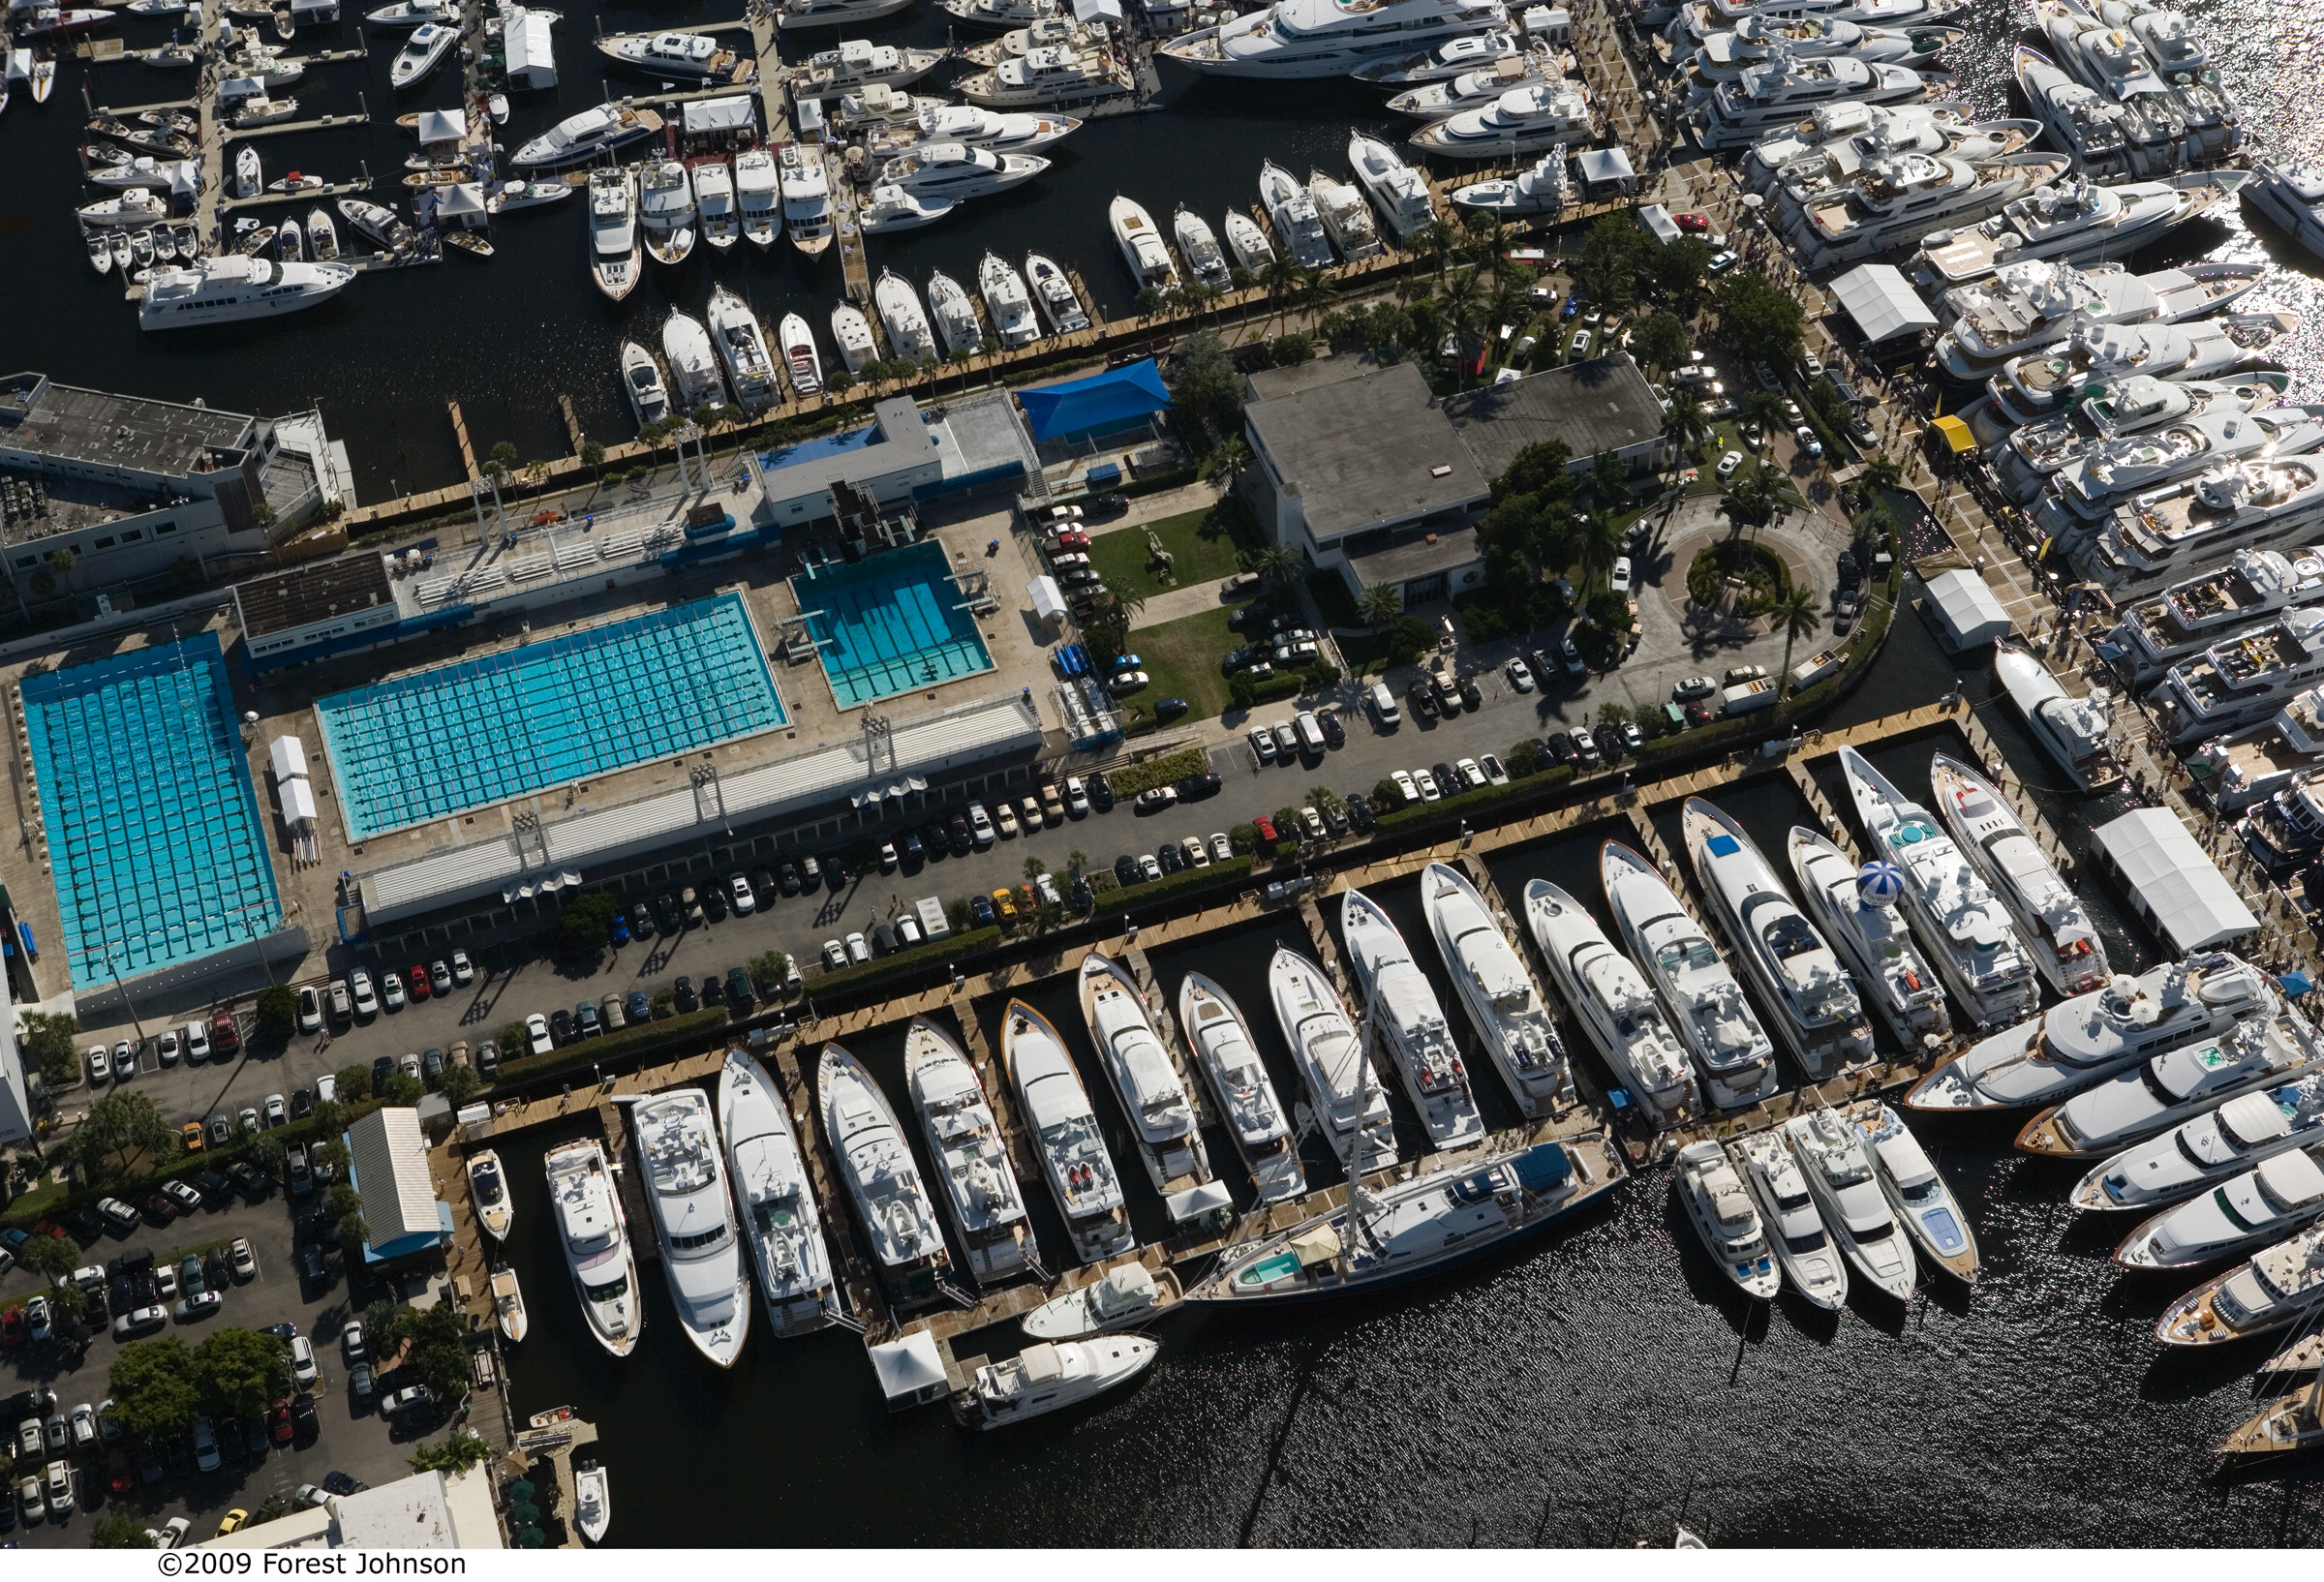 Fort Lauderdale Boat Show Aerial Image — Yacht Charter & Superyacht News